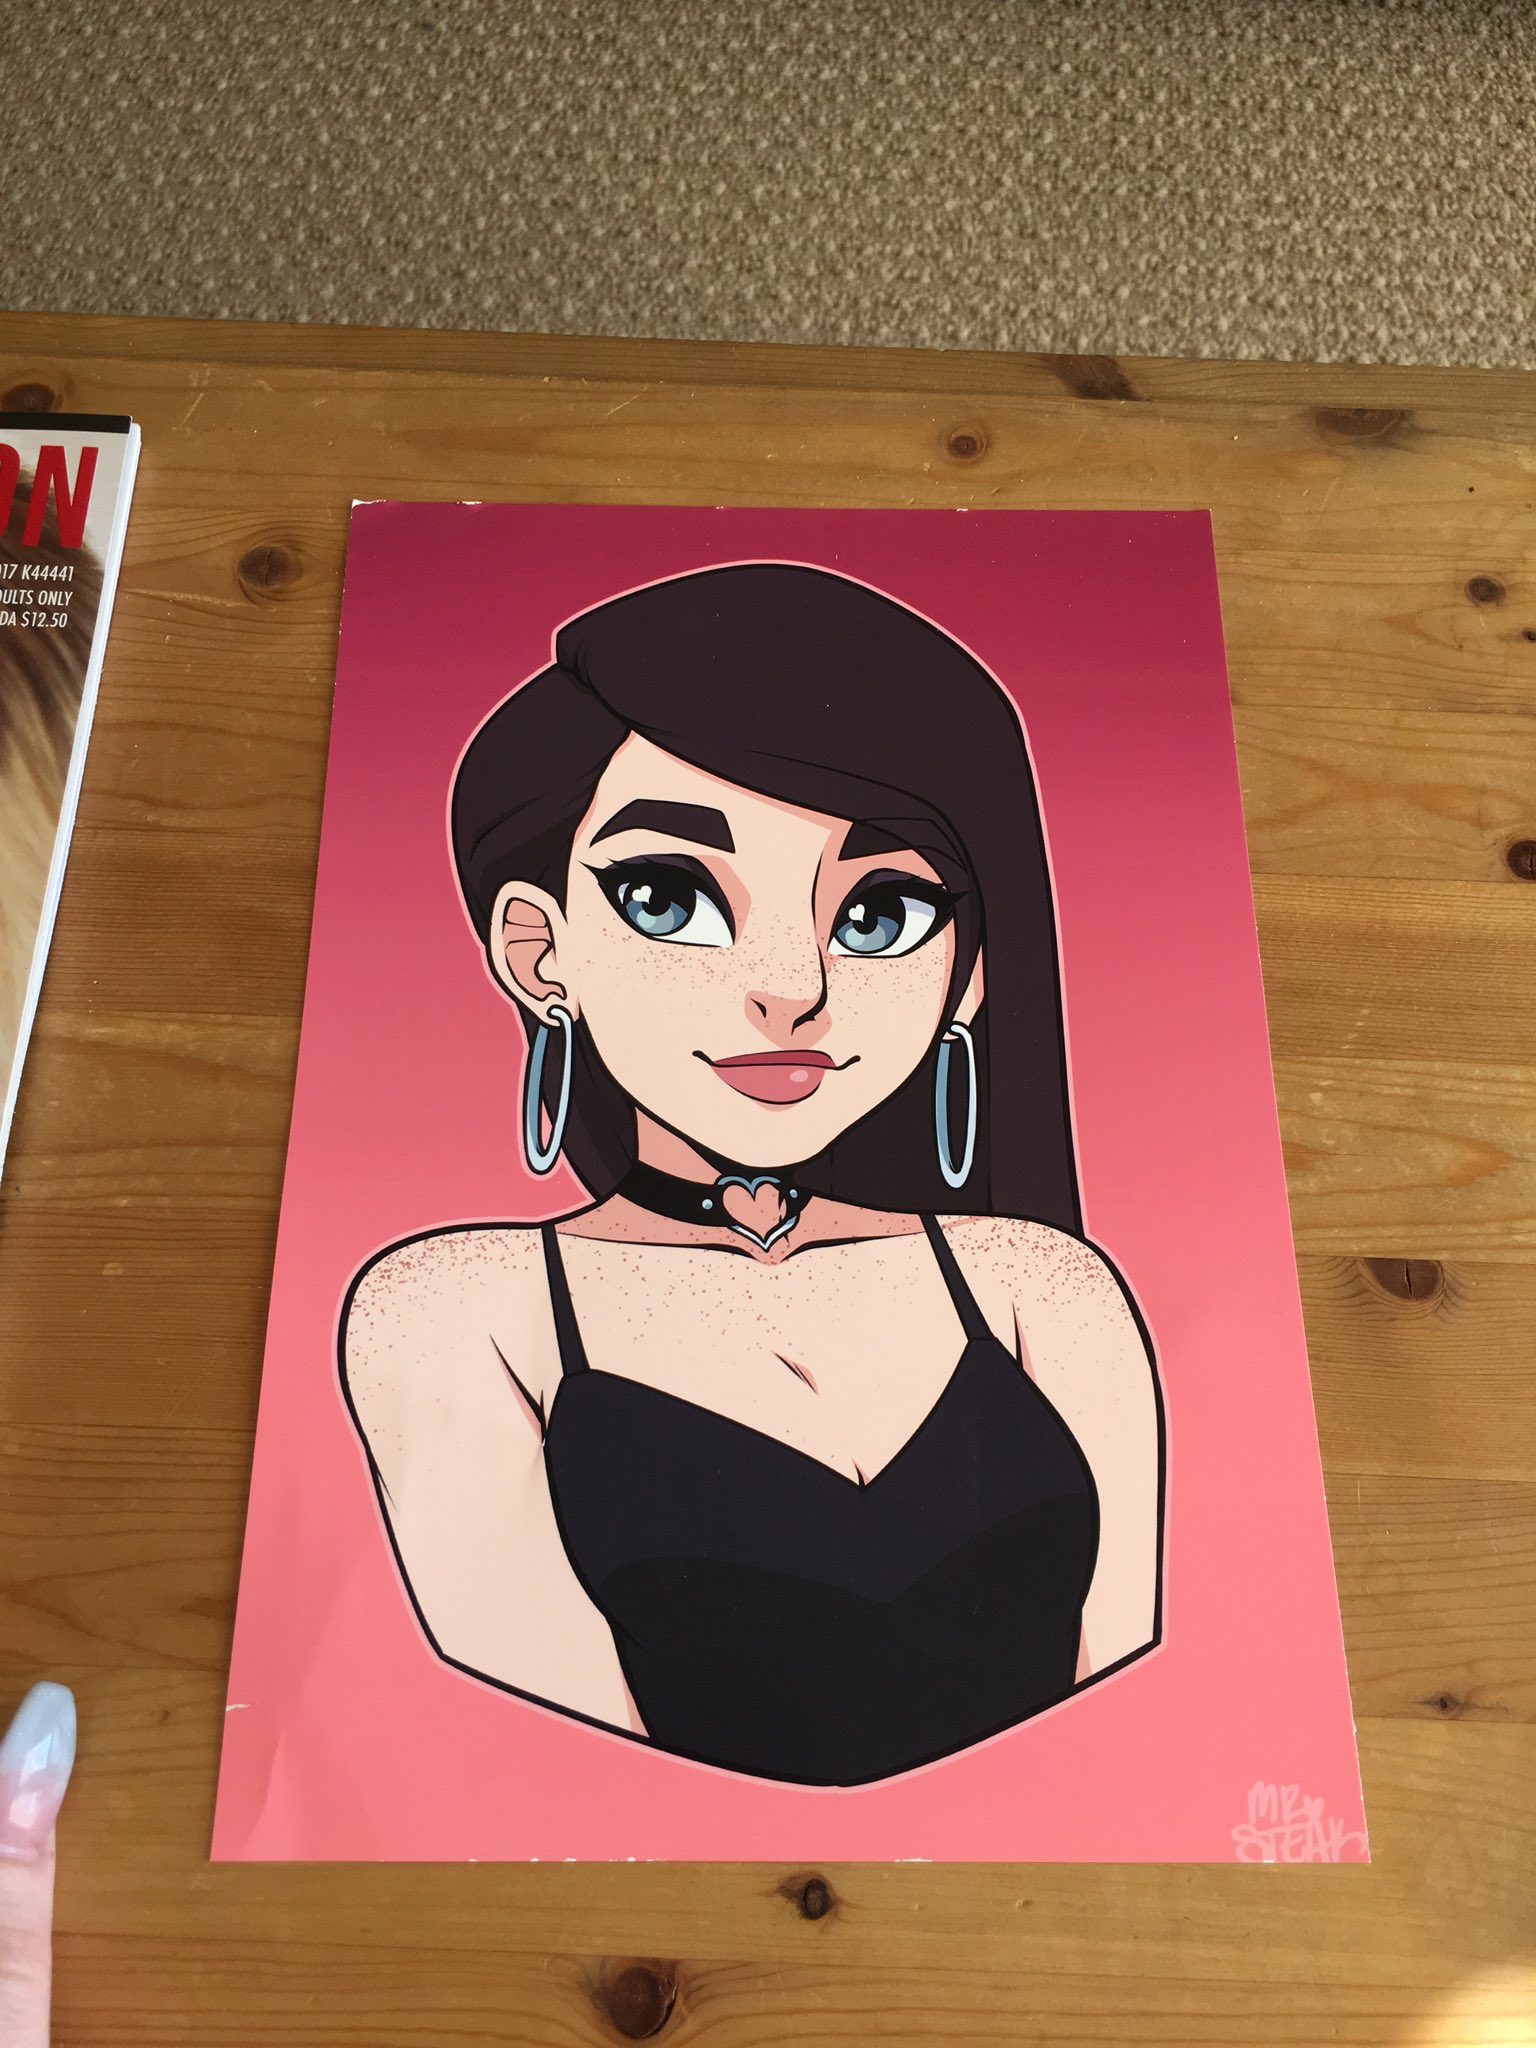 .@MrSteakArt sent me a print of the amazing fan art he did of me! Thank you, Mr. Steak! ❤ https://t.